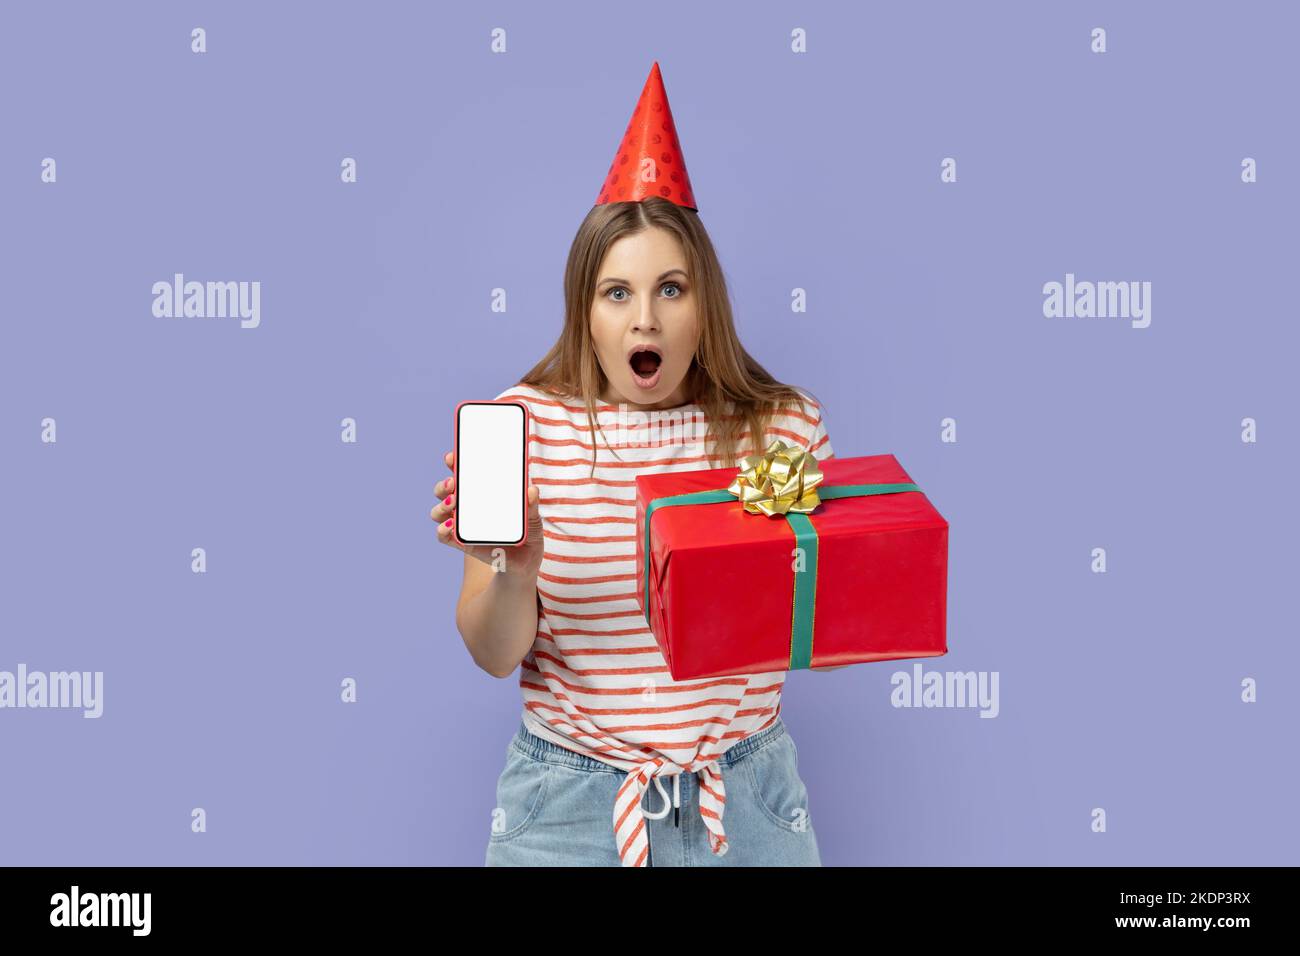 Portrait of shocked blond woman wearing striped T-shirt and party cone holding present box, holding smart phone with blank screen for promotional text. Indoor studio shot isolated on purple background Stock Photo